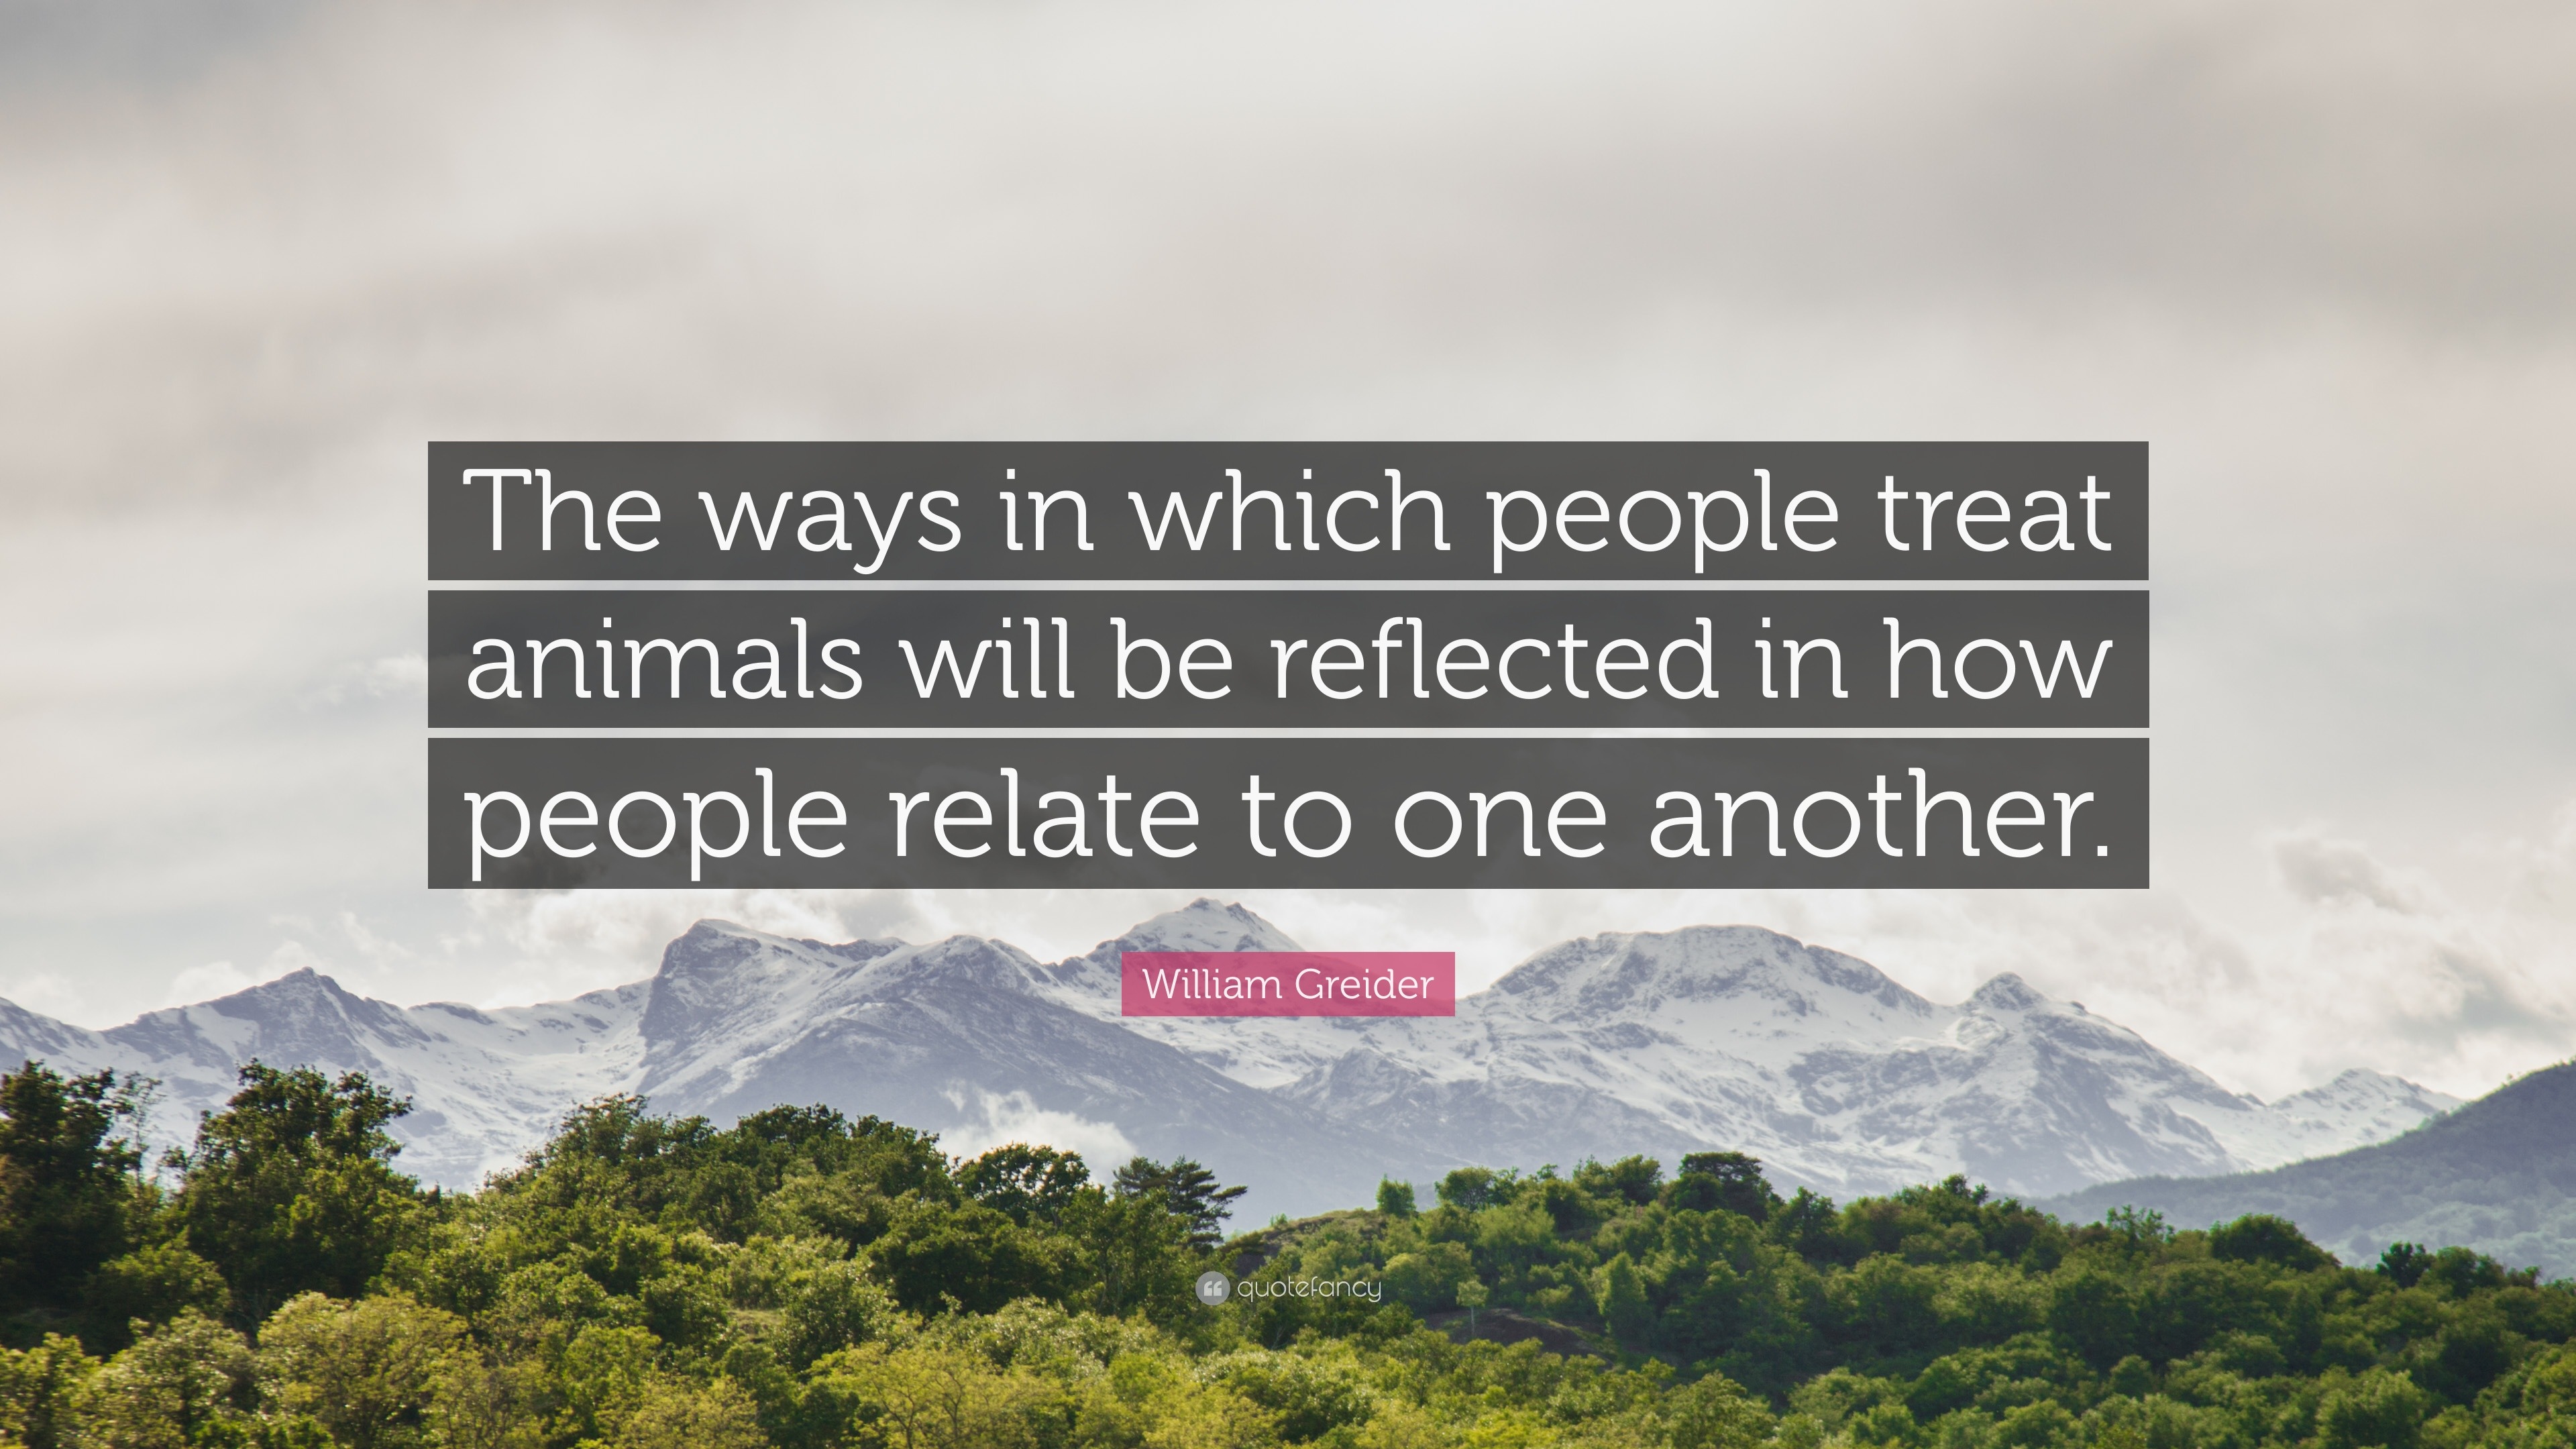 William Greider Quote: “The ways in which people treat animals will be  reflected in how people